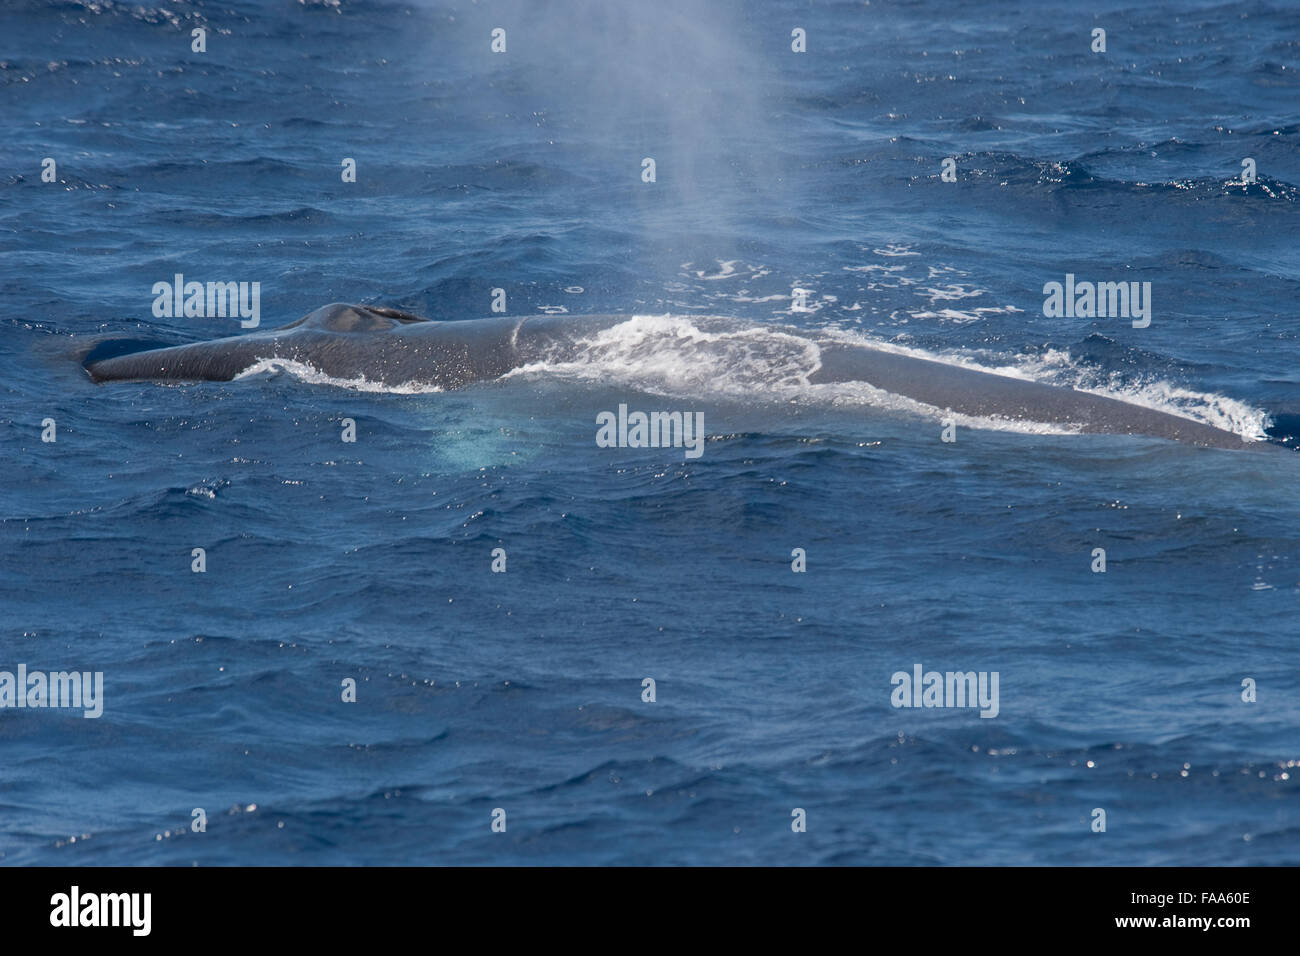 Fin Whale, Balaenoptera physalus, large adult animal surfacing, Azores, Atlantic Ocean Stock Photo